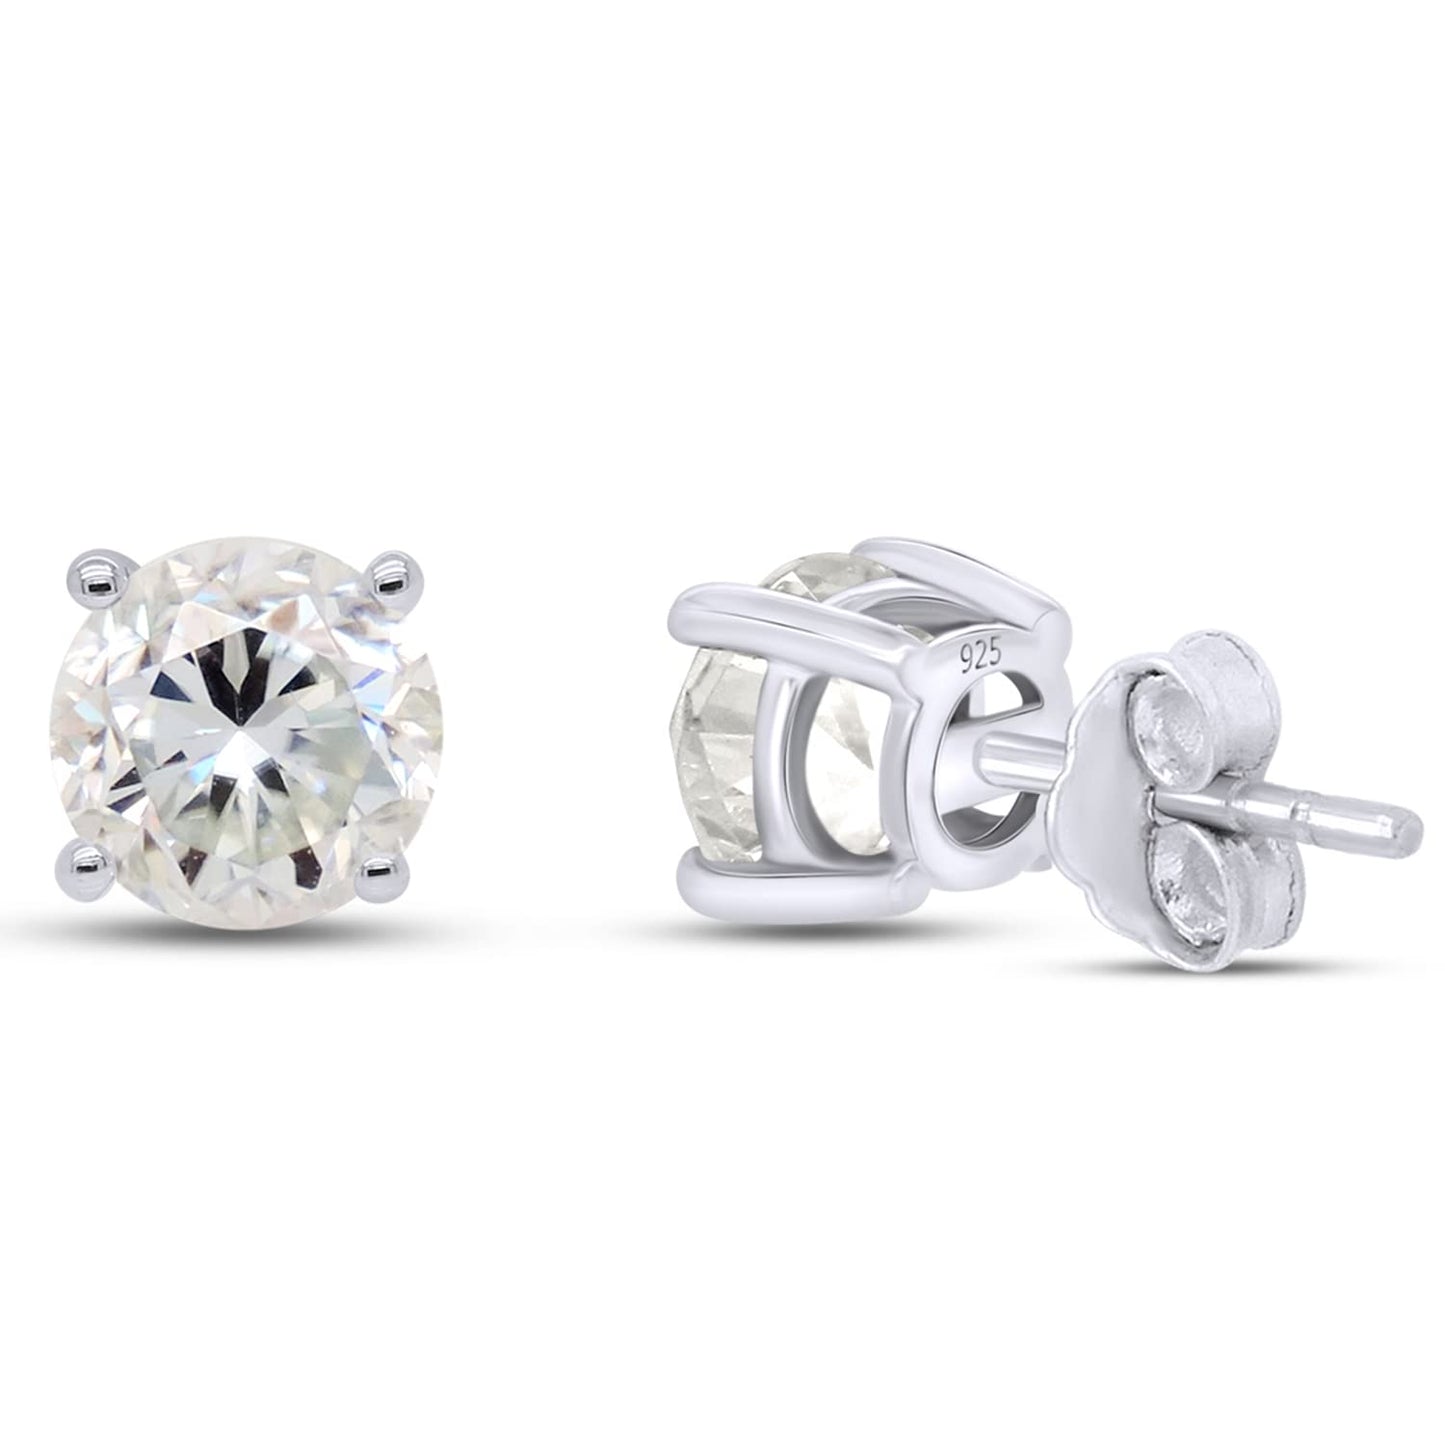 Load image into Gallery viewer, 3 Carat Round Cut Lab Created Moissanite Diamond Push Back Solitaire Stud Earrings In 925 Sterling Silver (3 Cttw)
